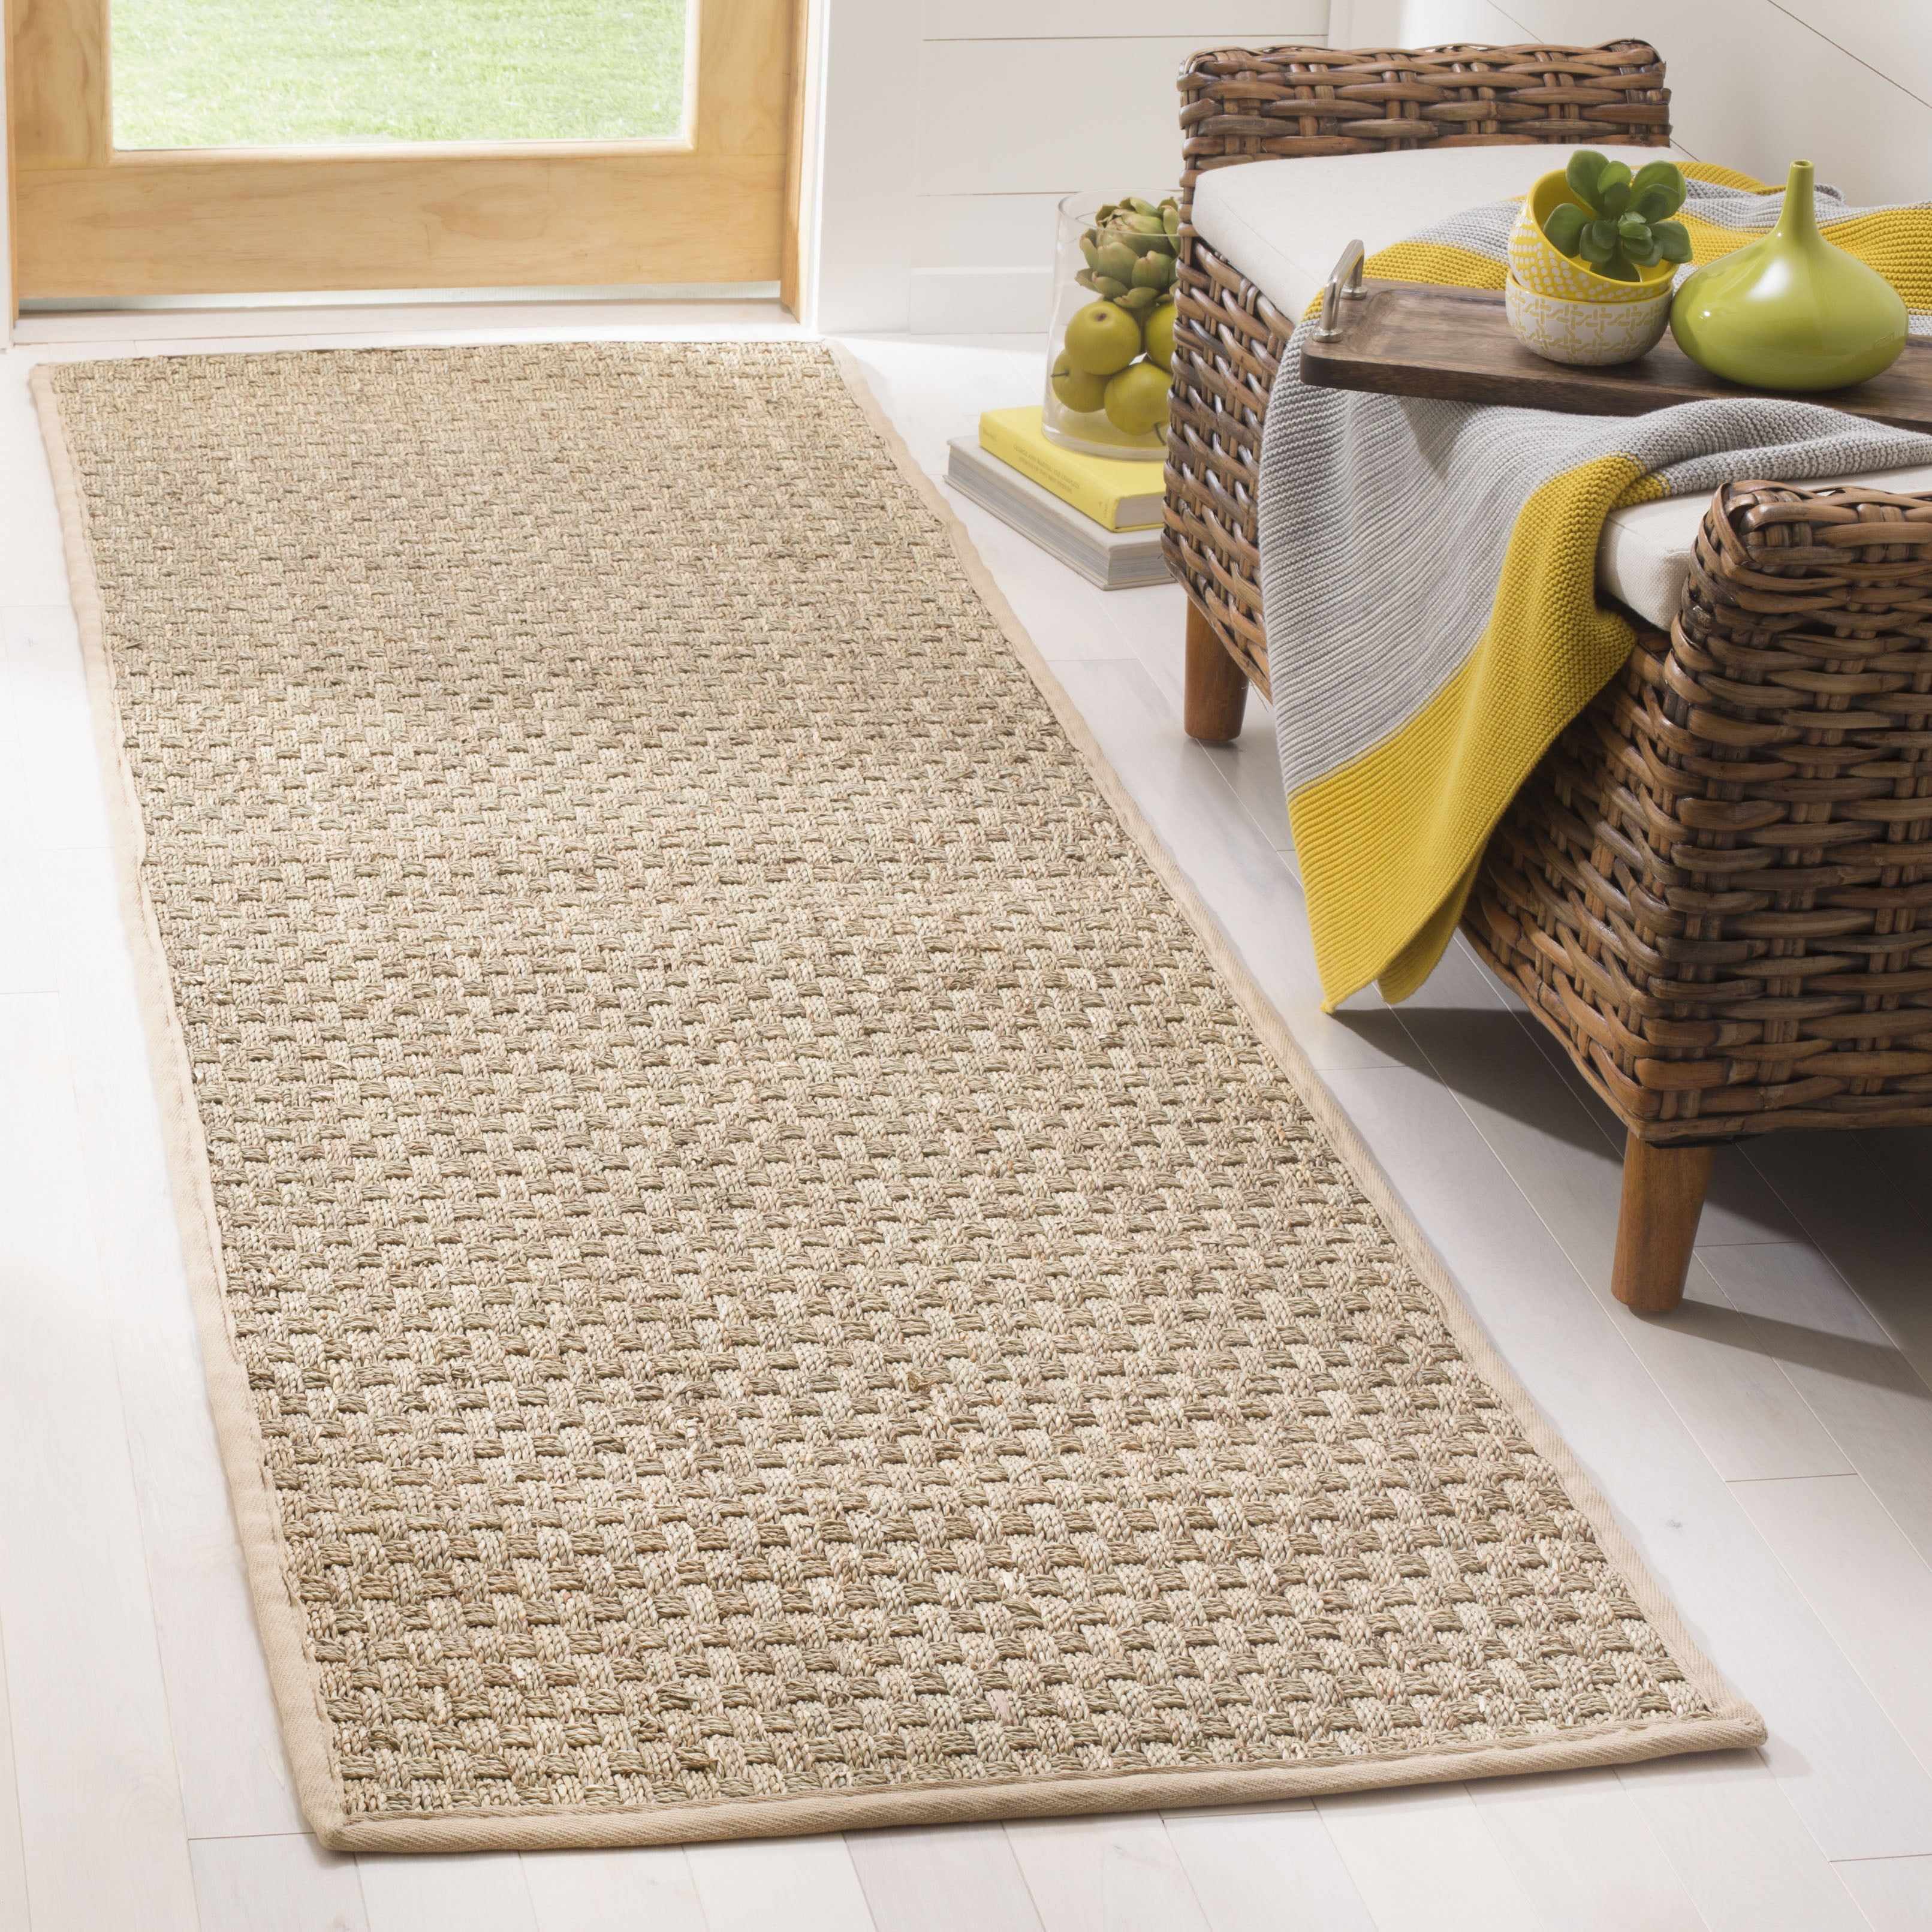  SAFAVIEH Natural Fiber Collection Runner Rug - 2'6 x 8',  Natural & Beige, Border Herringbone Seagrass Design, Easy Care, Ideal for  High Traffic Areas in Living Room, Bedroom (NF115A) : Home